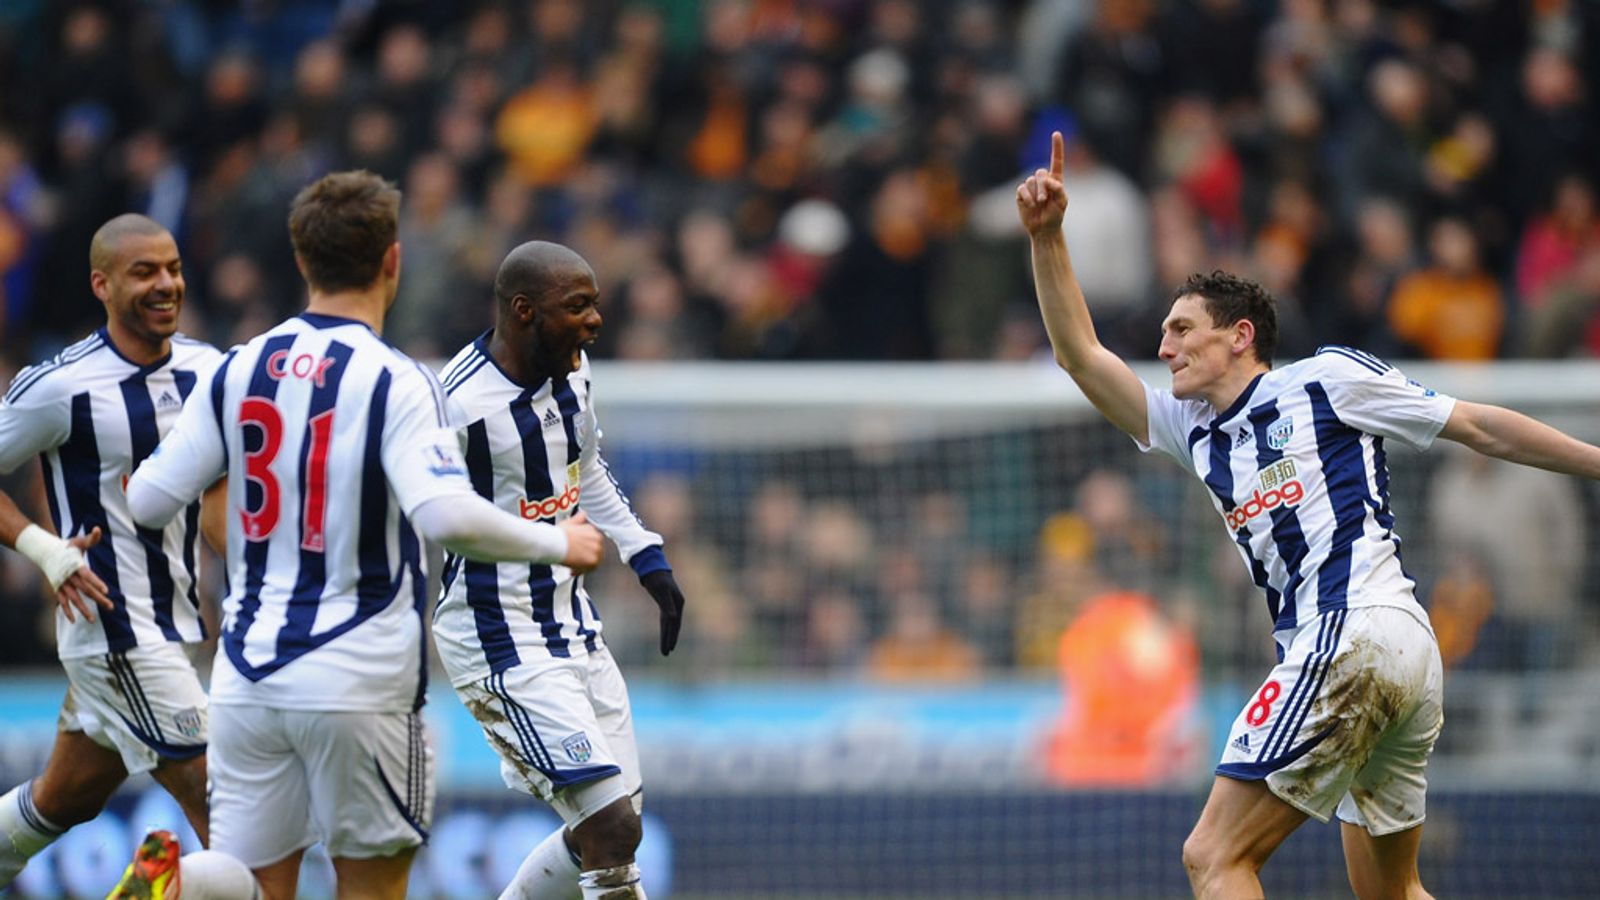 Wolves Vs West Brom / Preview: Blackpool vs. West Bromwich Albion